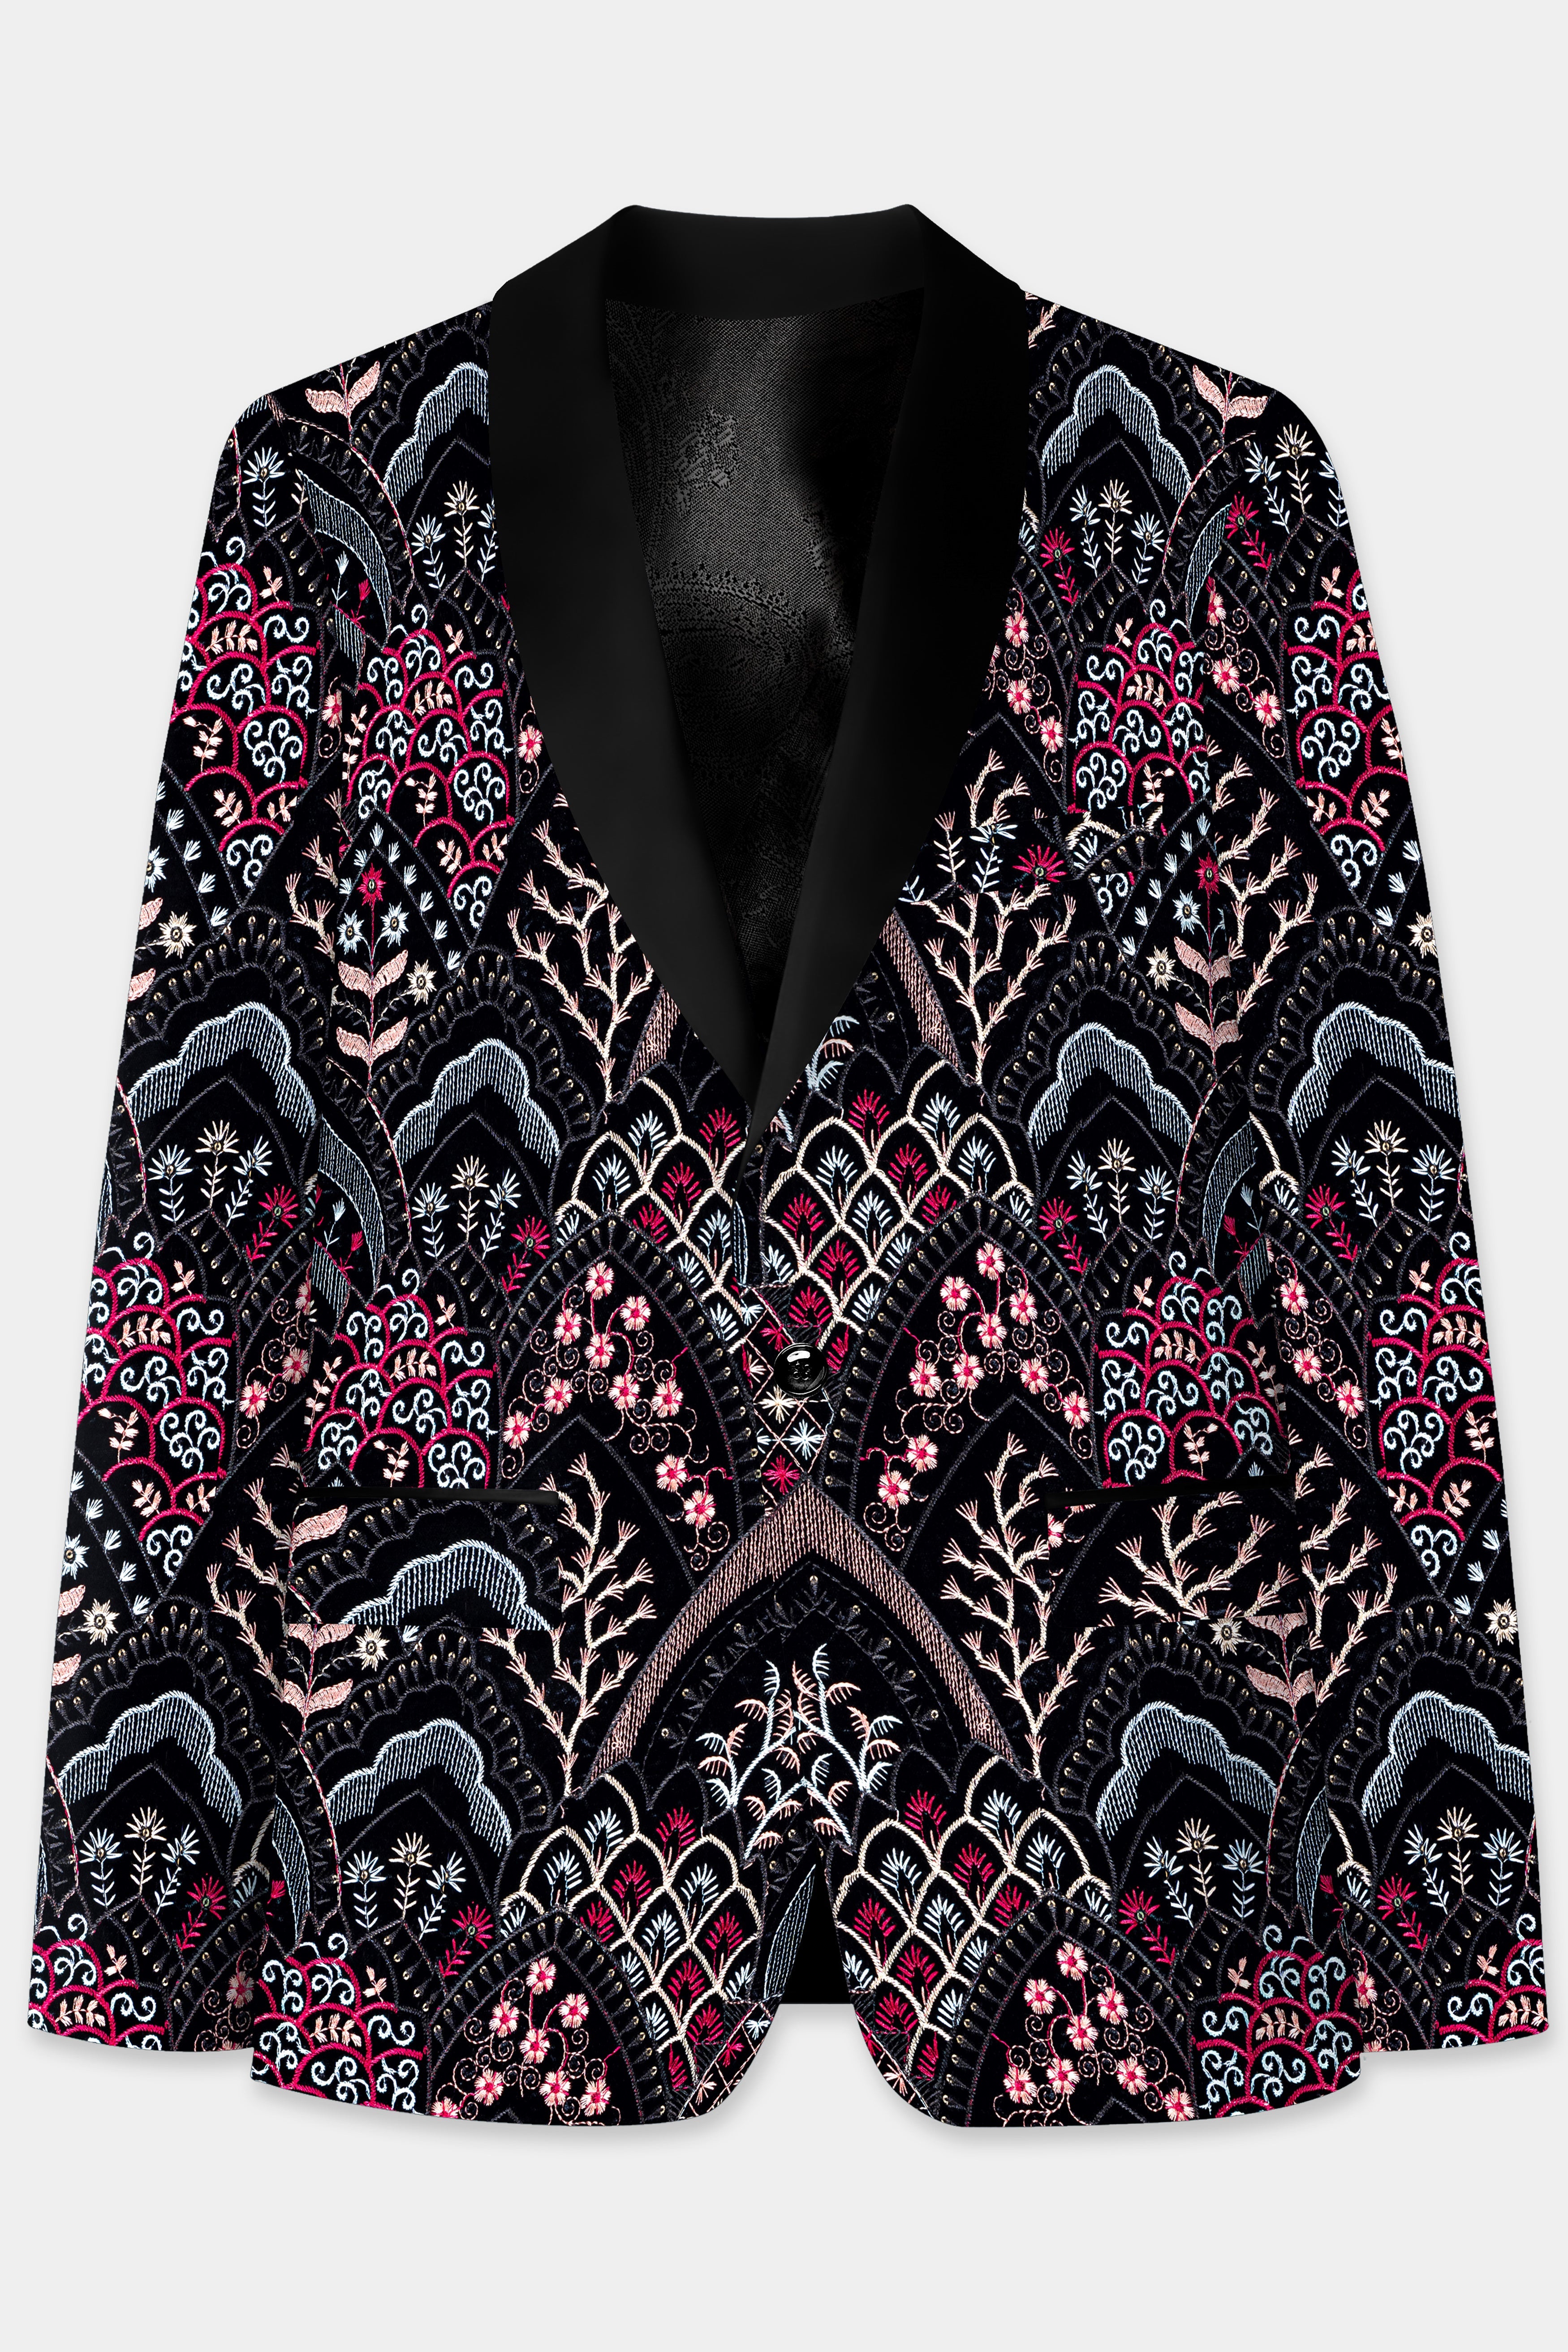 Jade Black with Tyrian Pink and Opium Brown Multicolour Floral Embroidered Tuxedo Blazer BL3690-BKL-36, BL3690-BKL-38, BL3690-BKL-40, BL3690-BKL-42, BL3690-BKL-44, BL3690-BKL-46, BL3690-BKL-48, BL3690-BKL-50, BL3690-BKL-52, BL3690-BKL-54, BL3690-BKL-56, BL3690-BKL-58, BL3690-BKL-60